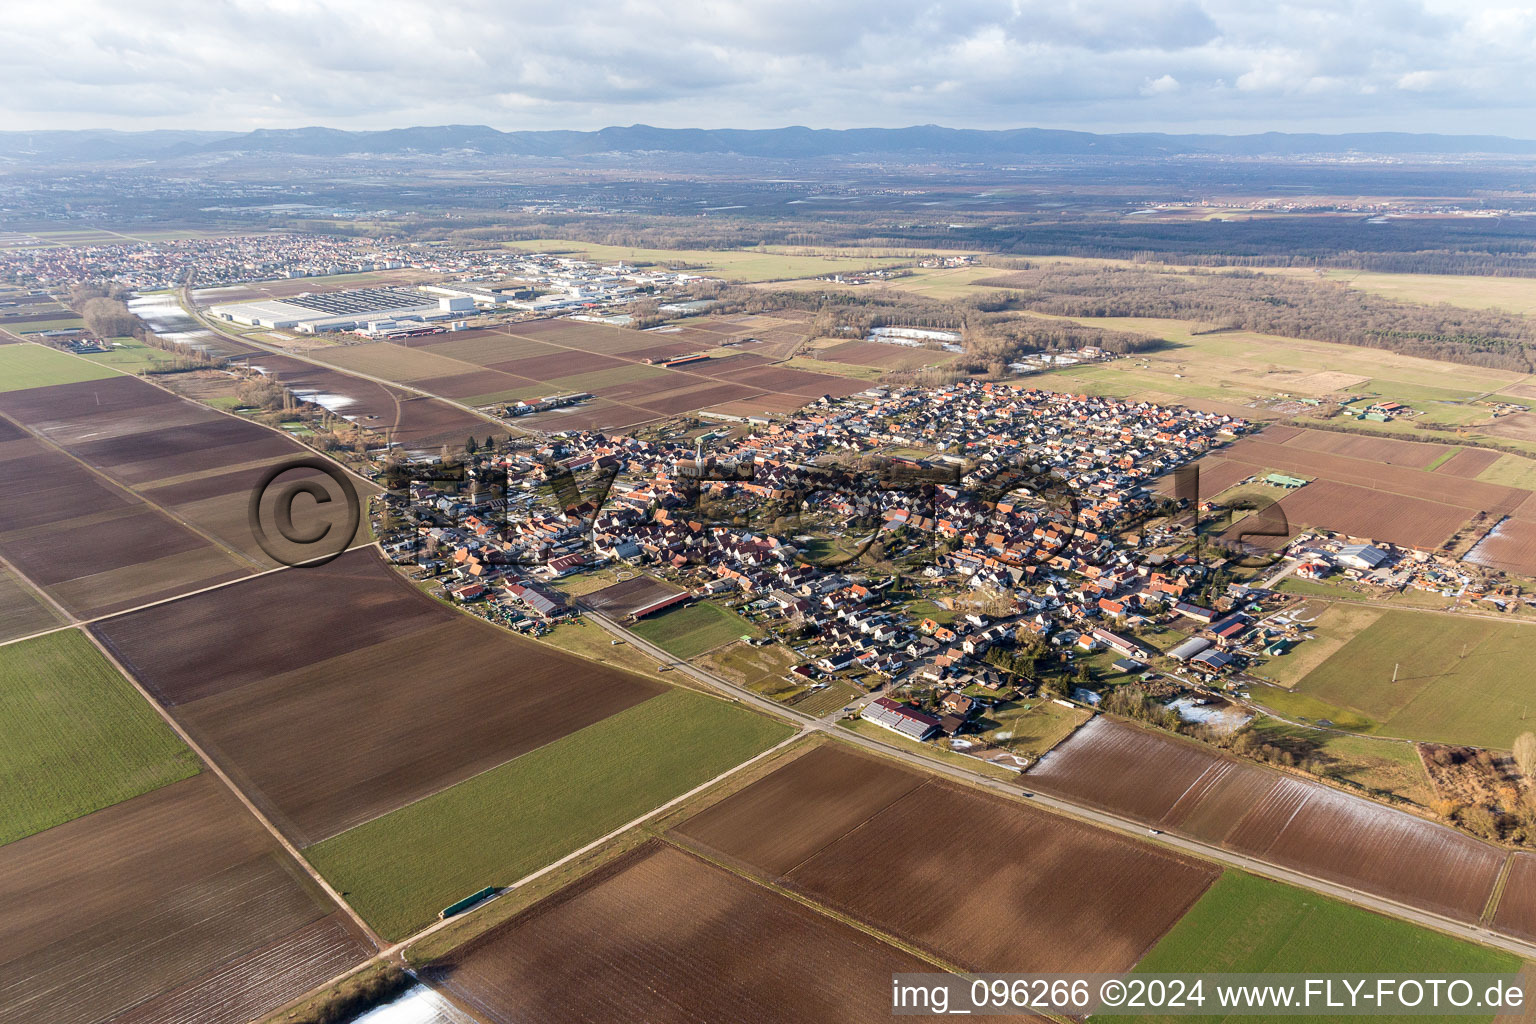 Village - view on the edge of agricultural fields and farmland in Ottersheim bei Landau in the state Rhineland-Palatinate, Germany